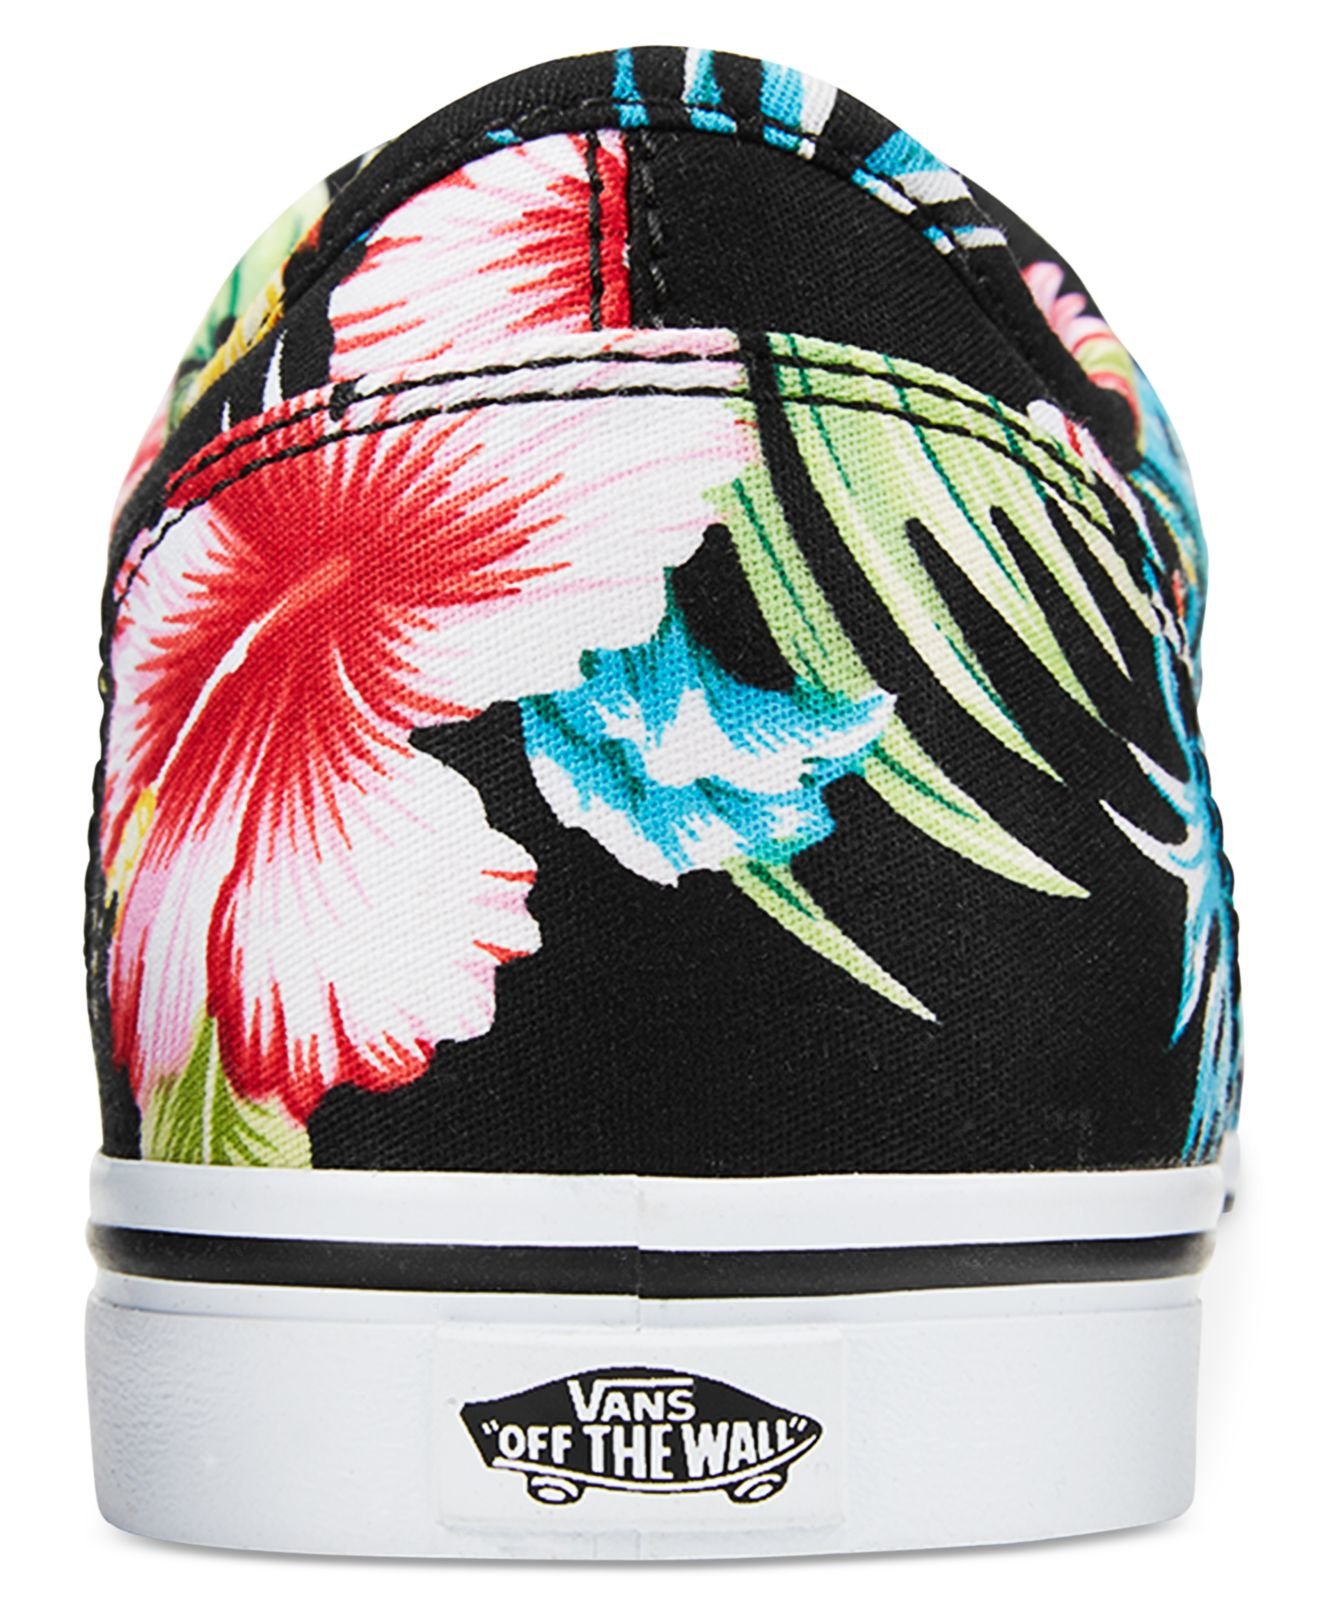 Vans Women's Atwood Low Aloha Lace-up Sneakers in Black | Lyst